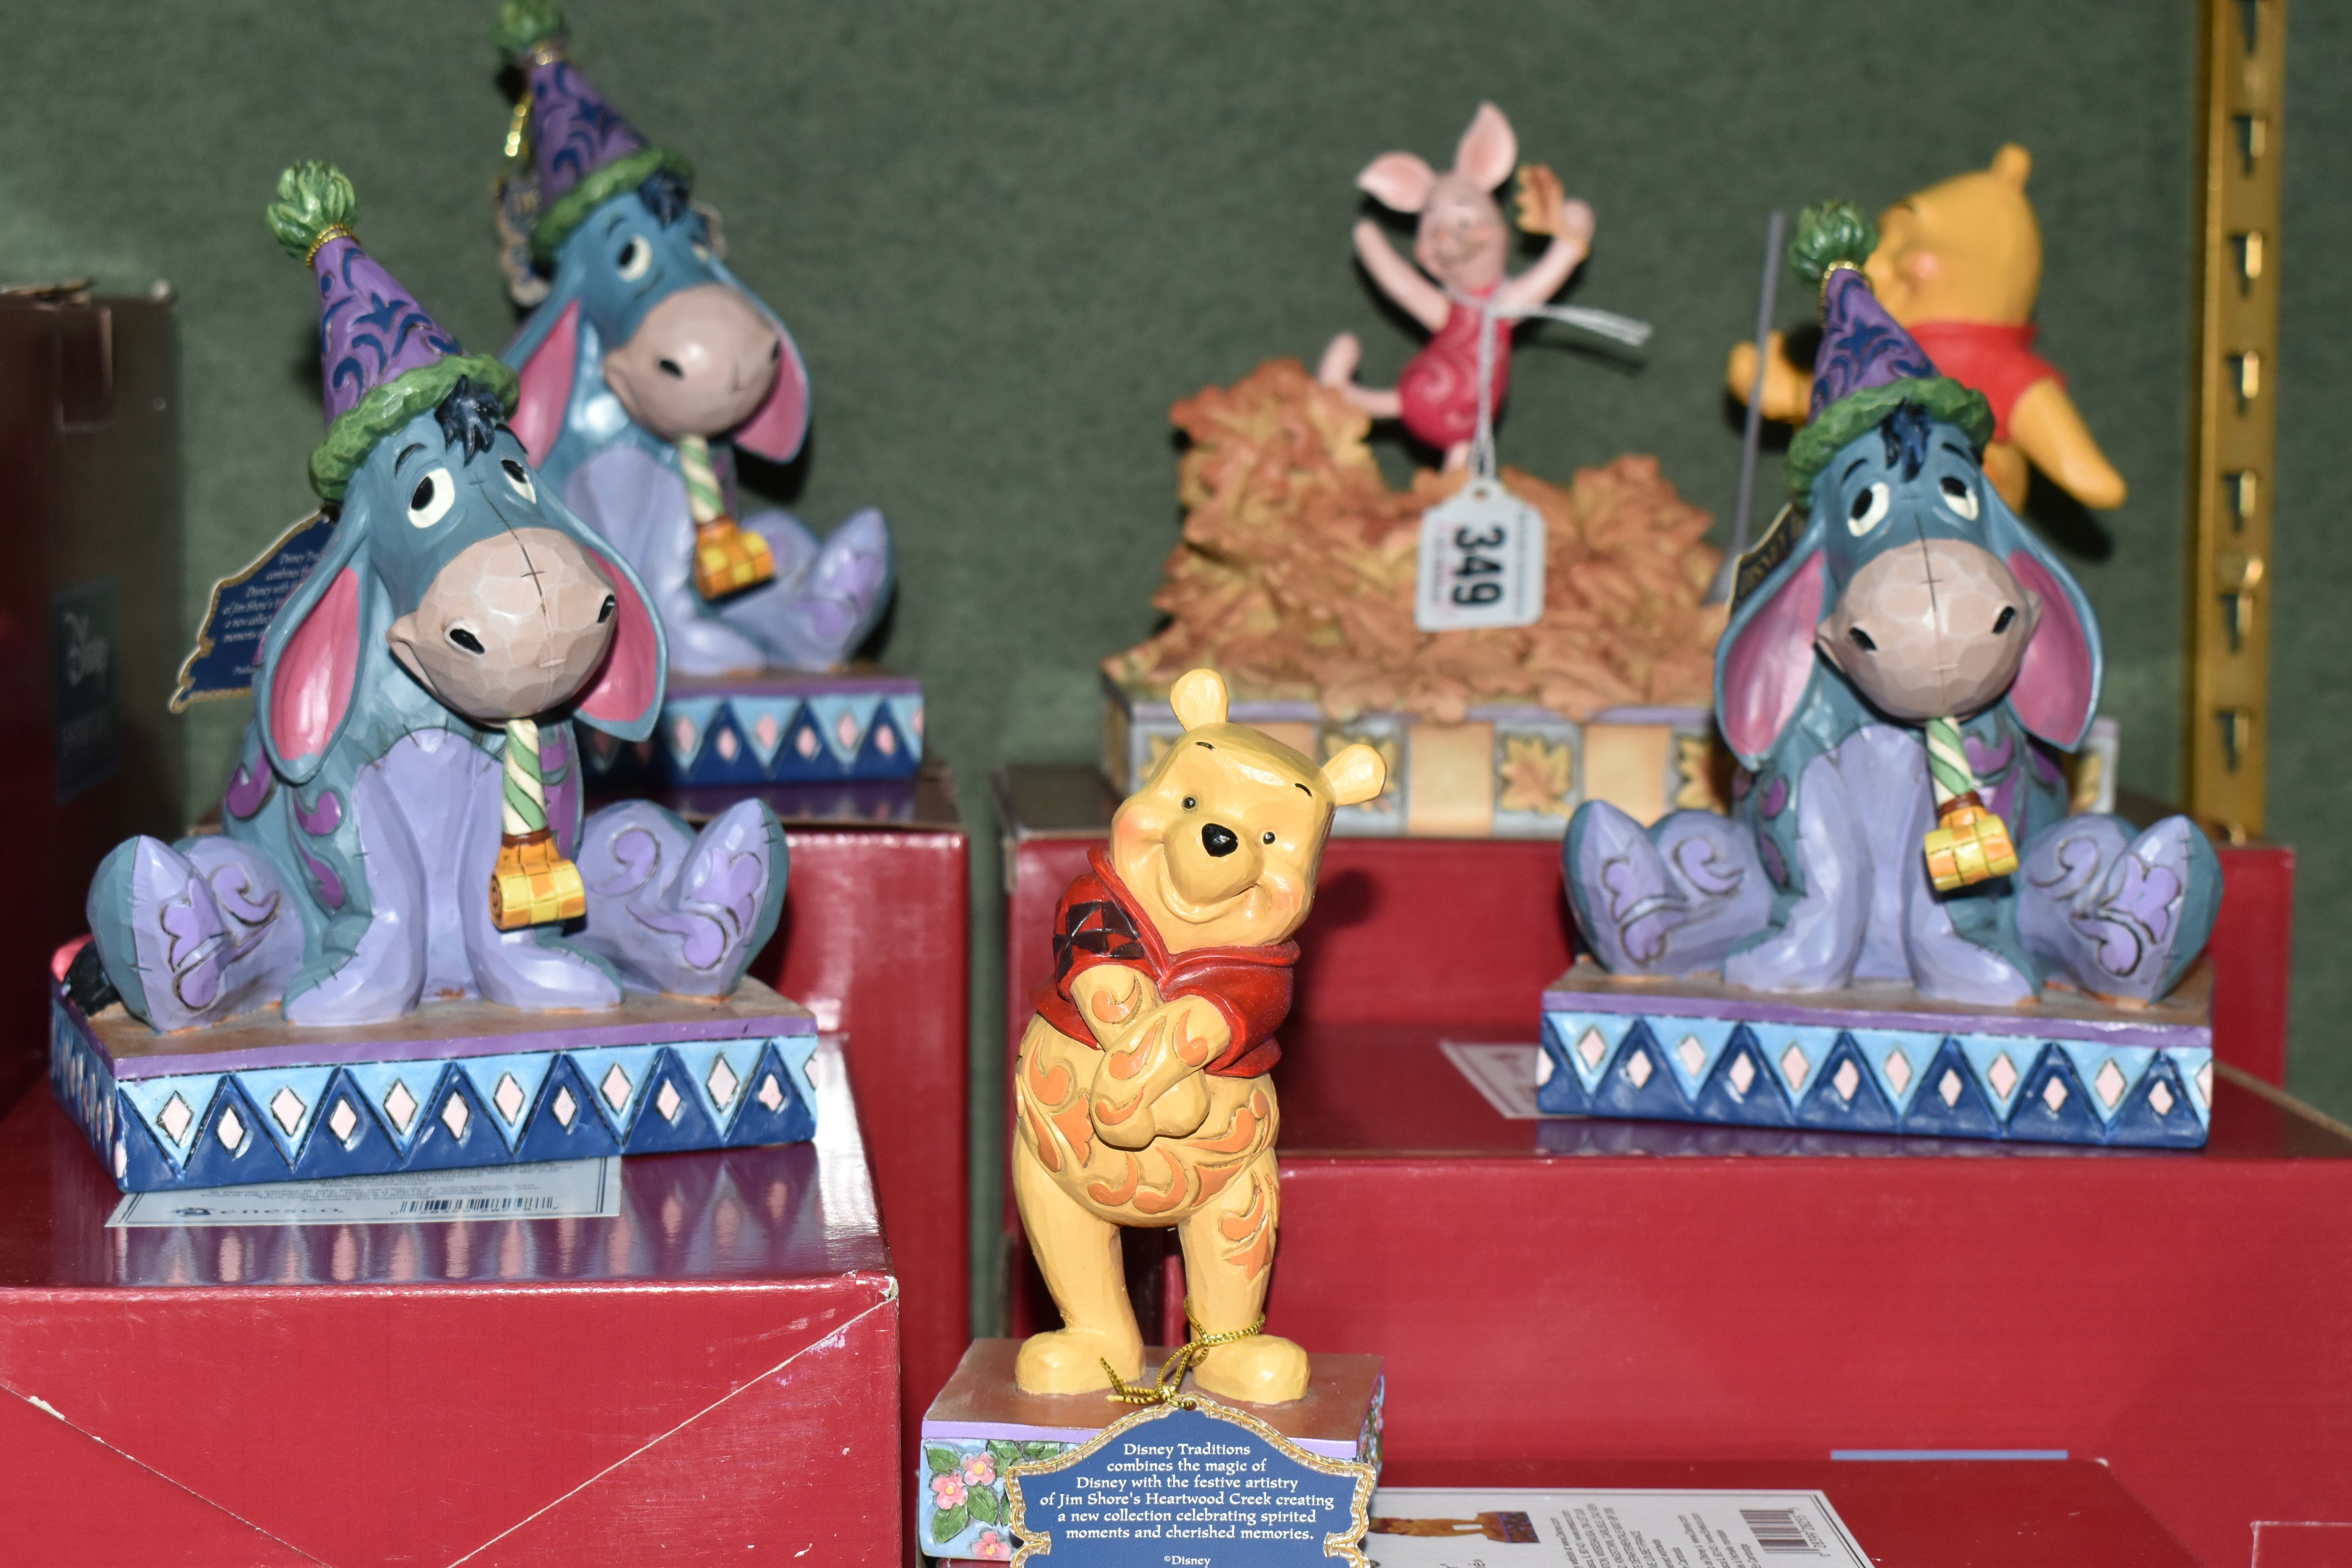 FIVE BOXED ENESCO DISNEY SHOWCASE 'WINNIE THE POOH' FIGURES, from Disney Traditions by Jim Shore,